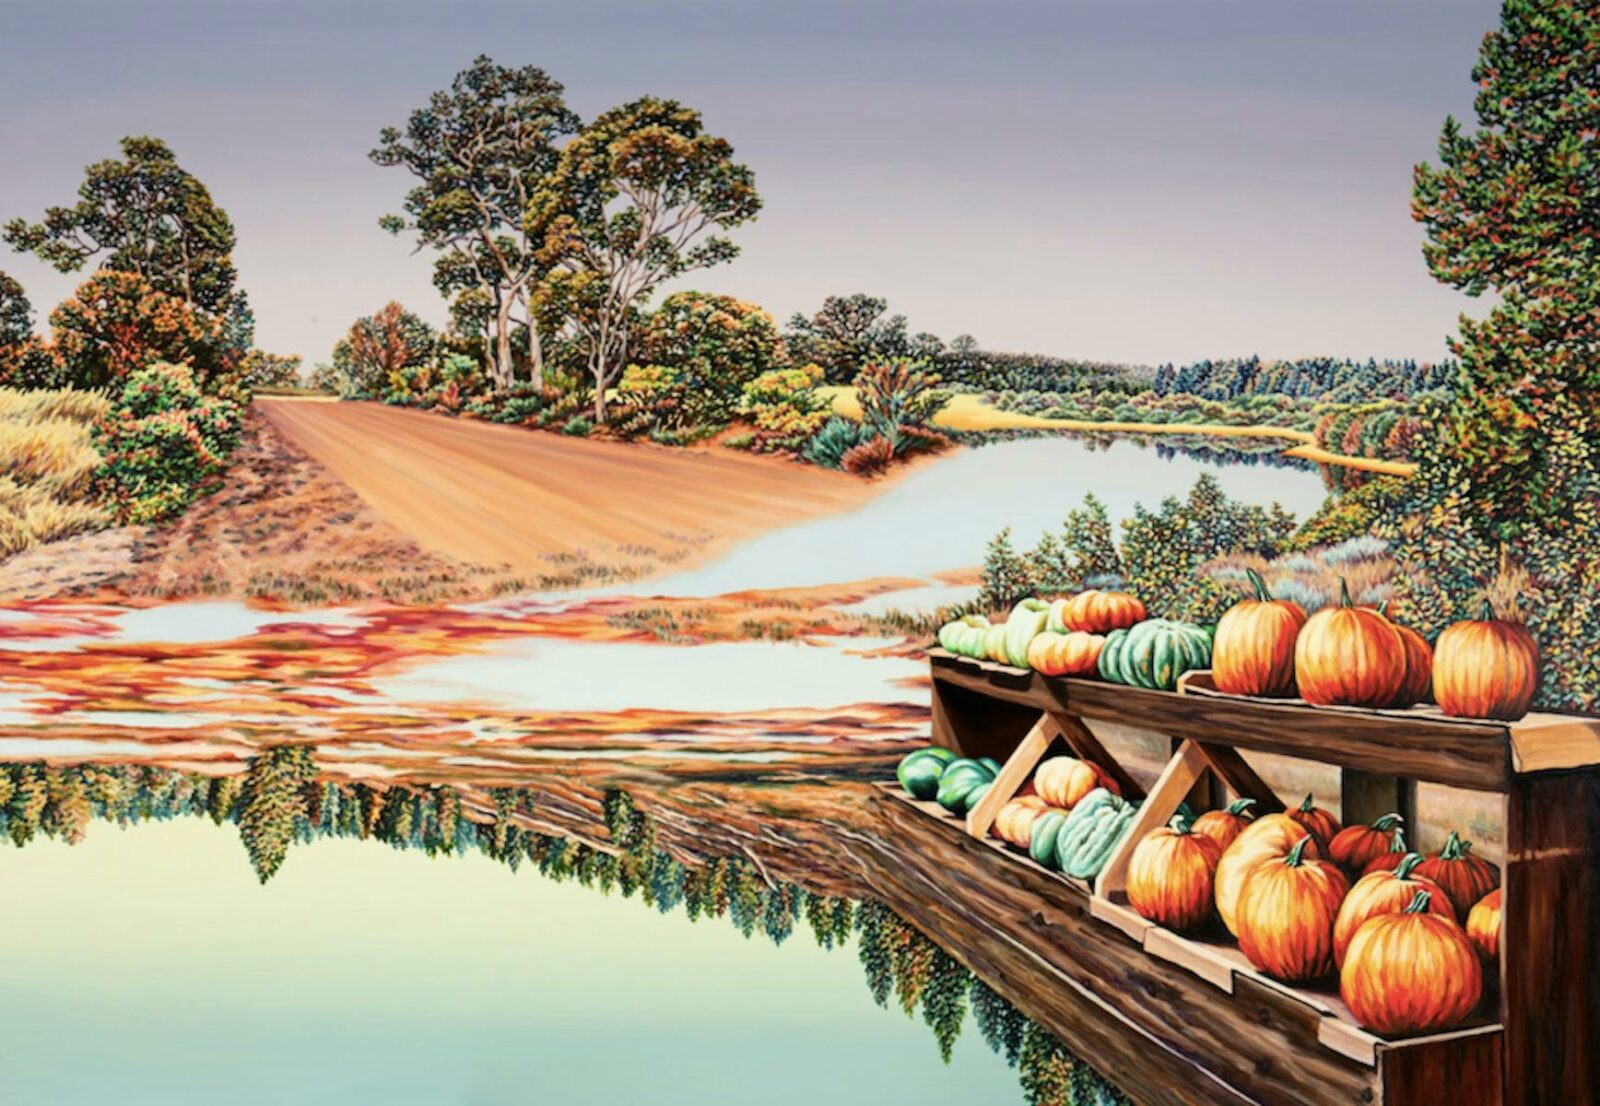 A surreal landscape painting of a dirt road emerging from a body of water and roadside pumpkin stand